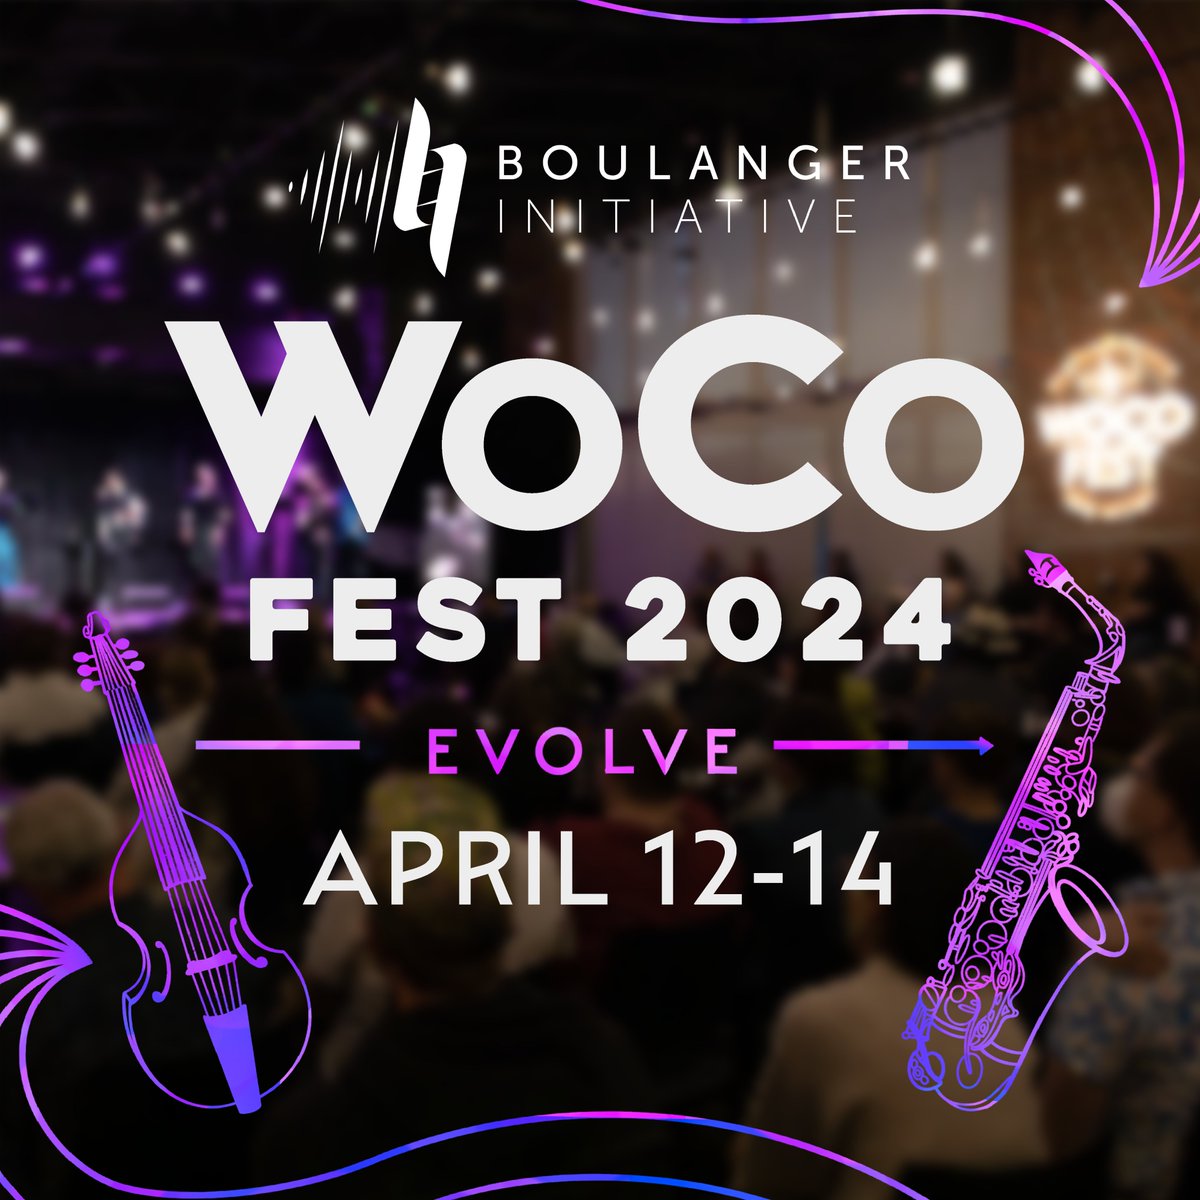 Here at Boulanger Initiative, we have a lot to celebrate in this Women’s History Month! Tickets are on sale now for WoCo Fest 2024: Evolve, presented in collaboration with Strathmore. Experience the evolution of music spanning centuries, from a Baroque (1/7)